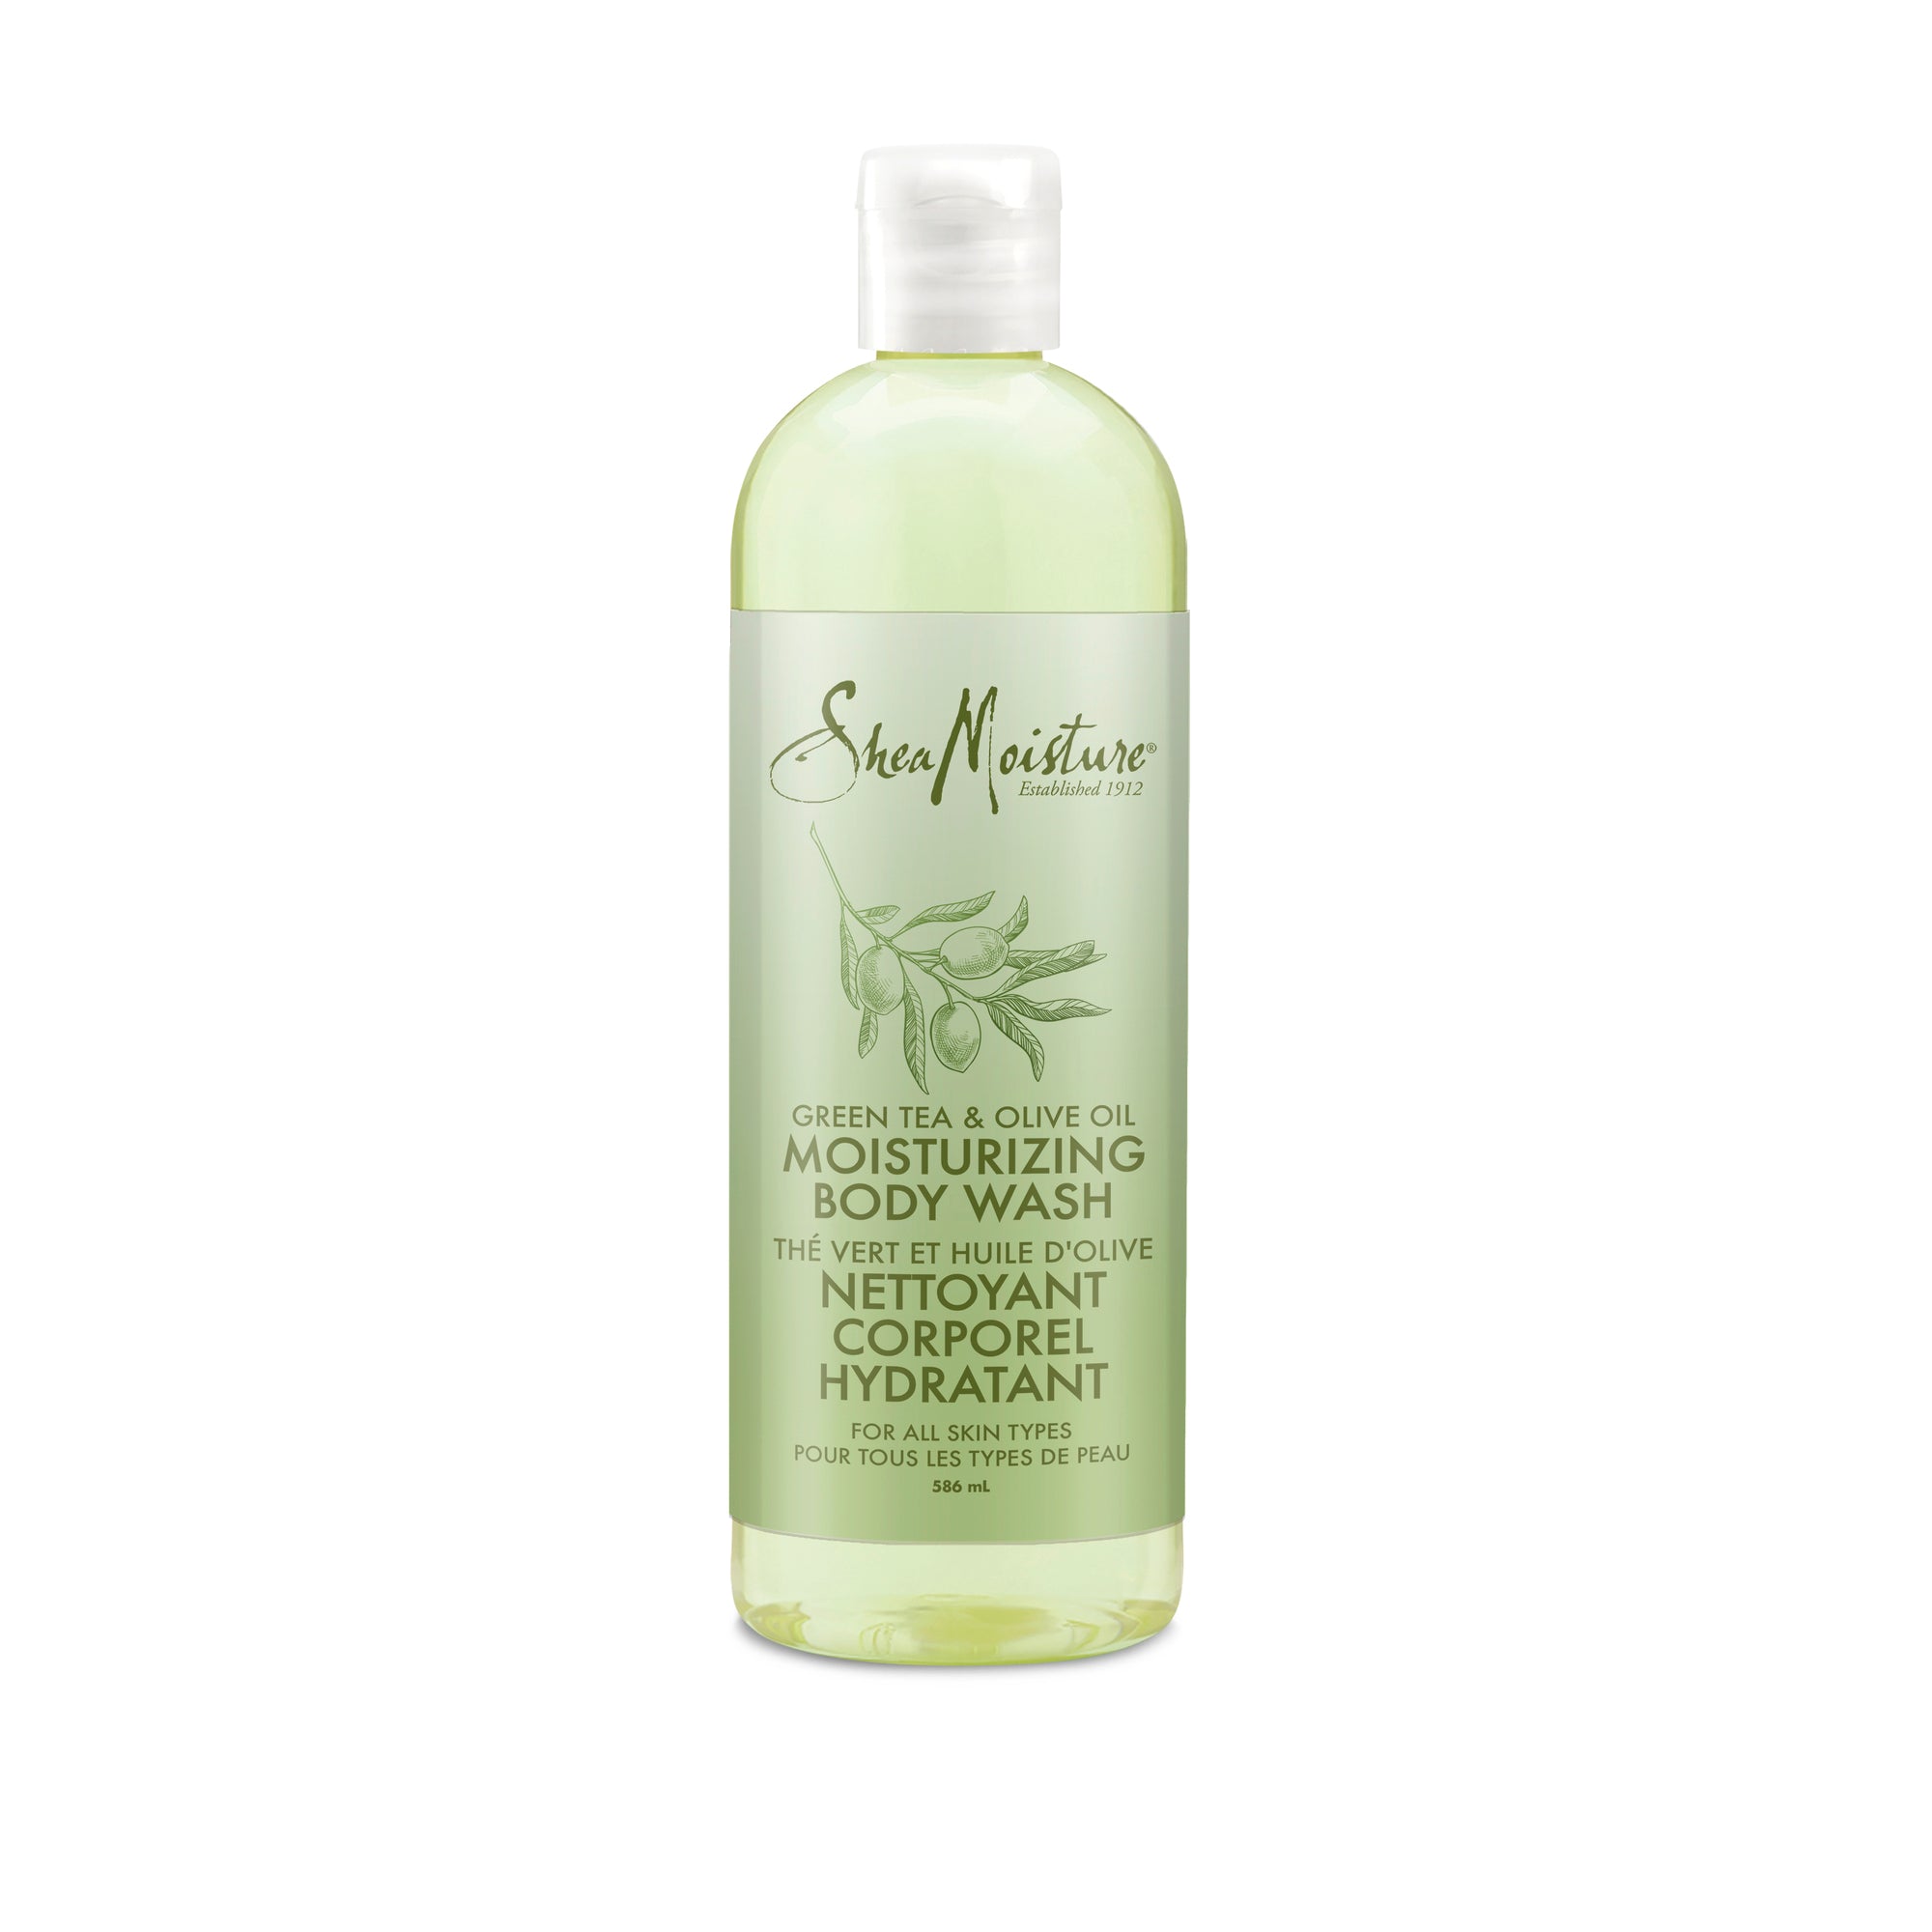 Showing the front angle view of the SheaMoisture Olive & Green Tea Moisturizing Body Wash 586ml product.